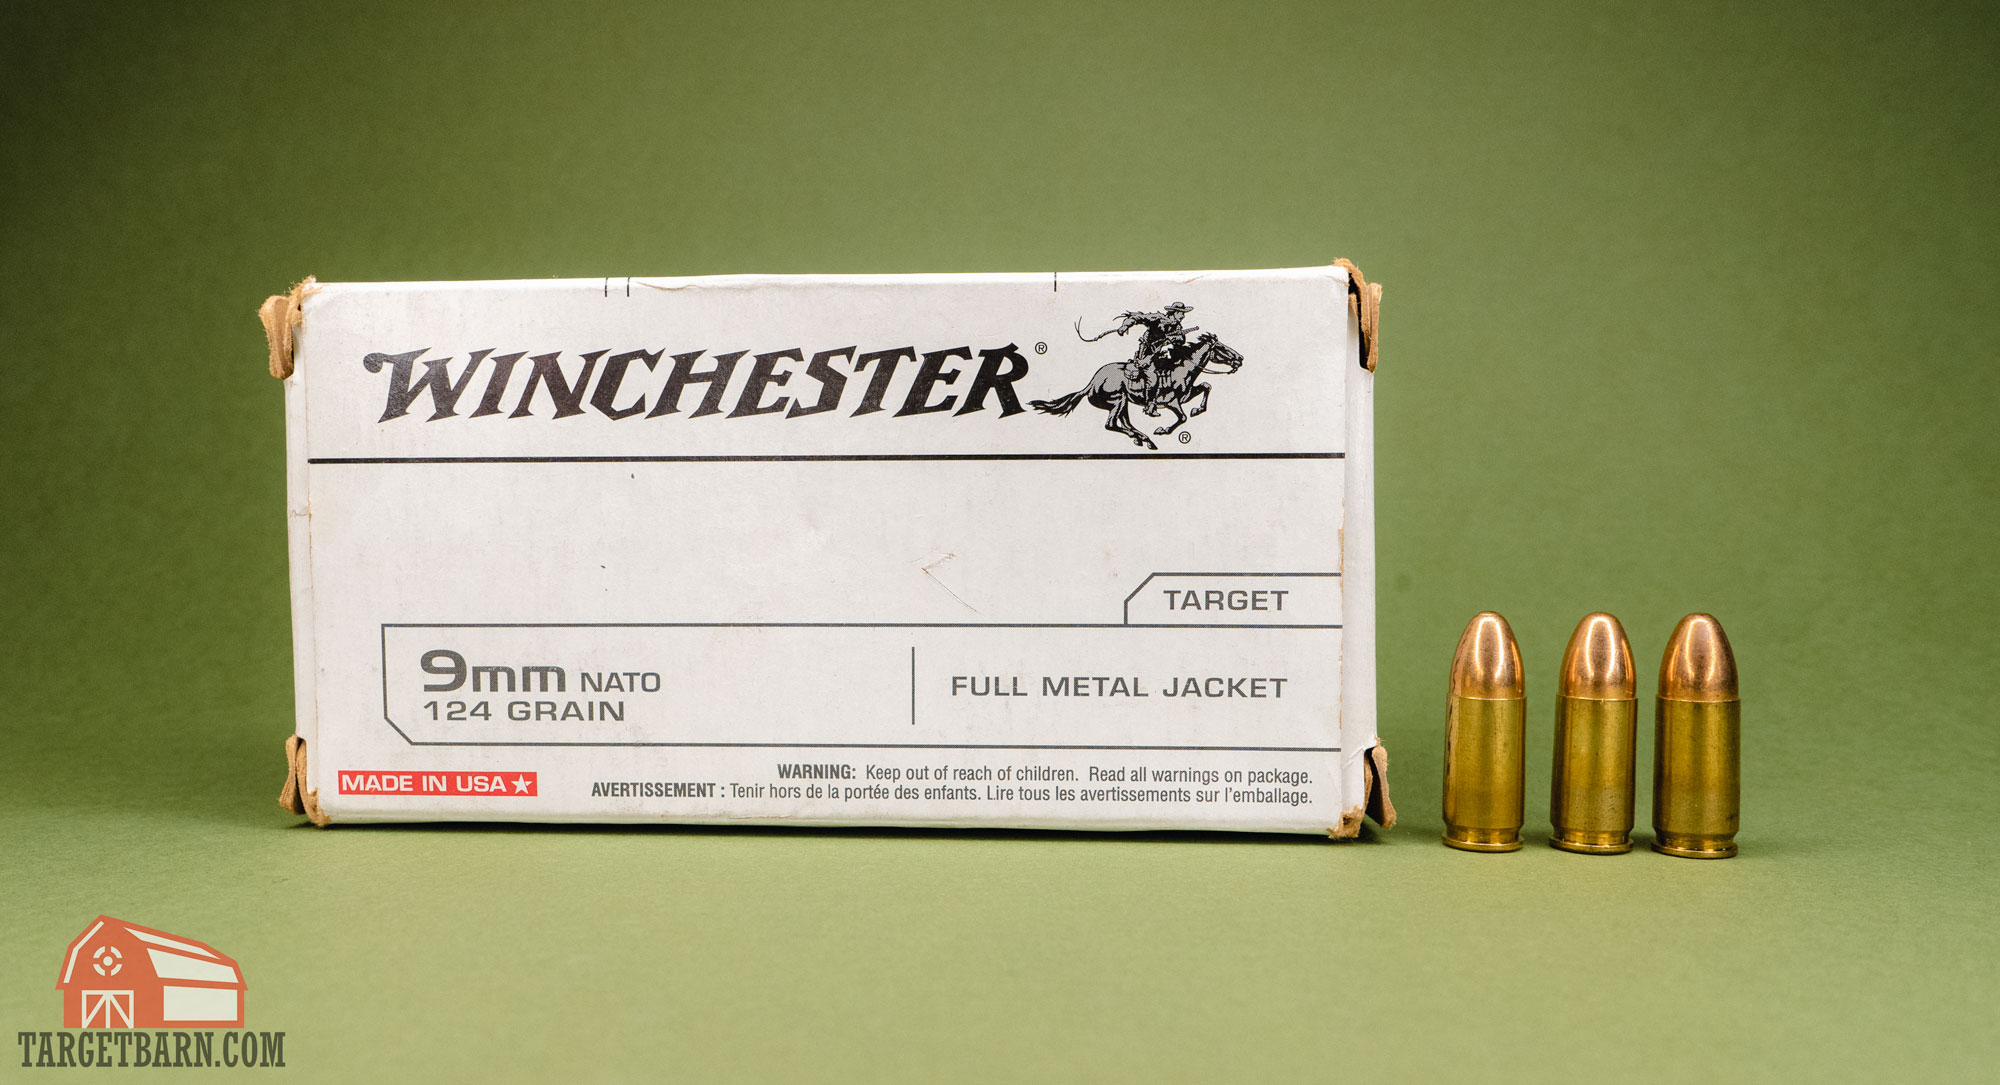 a box of winchester 9mm nato ammo with three rounds of 9mm